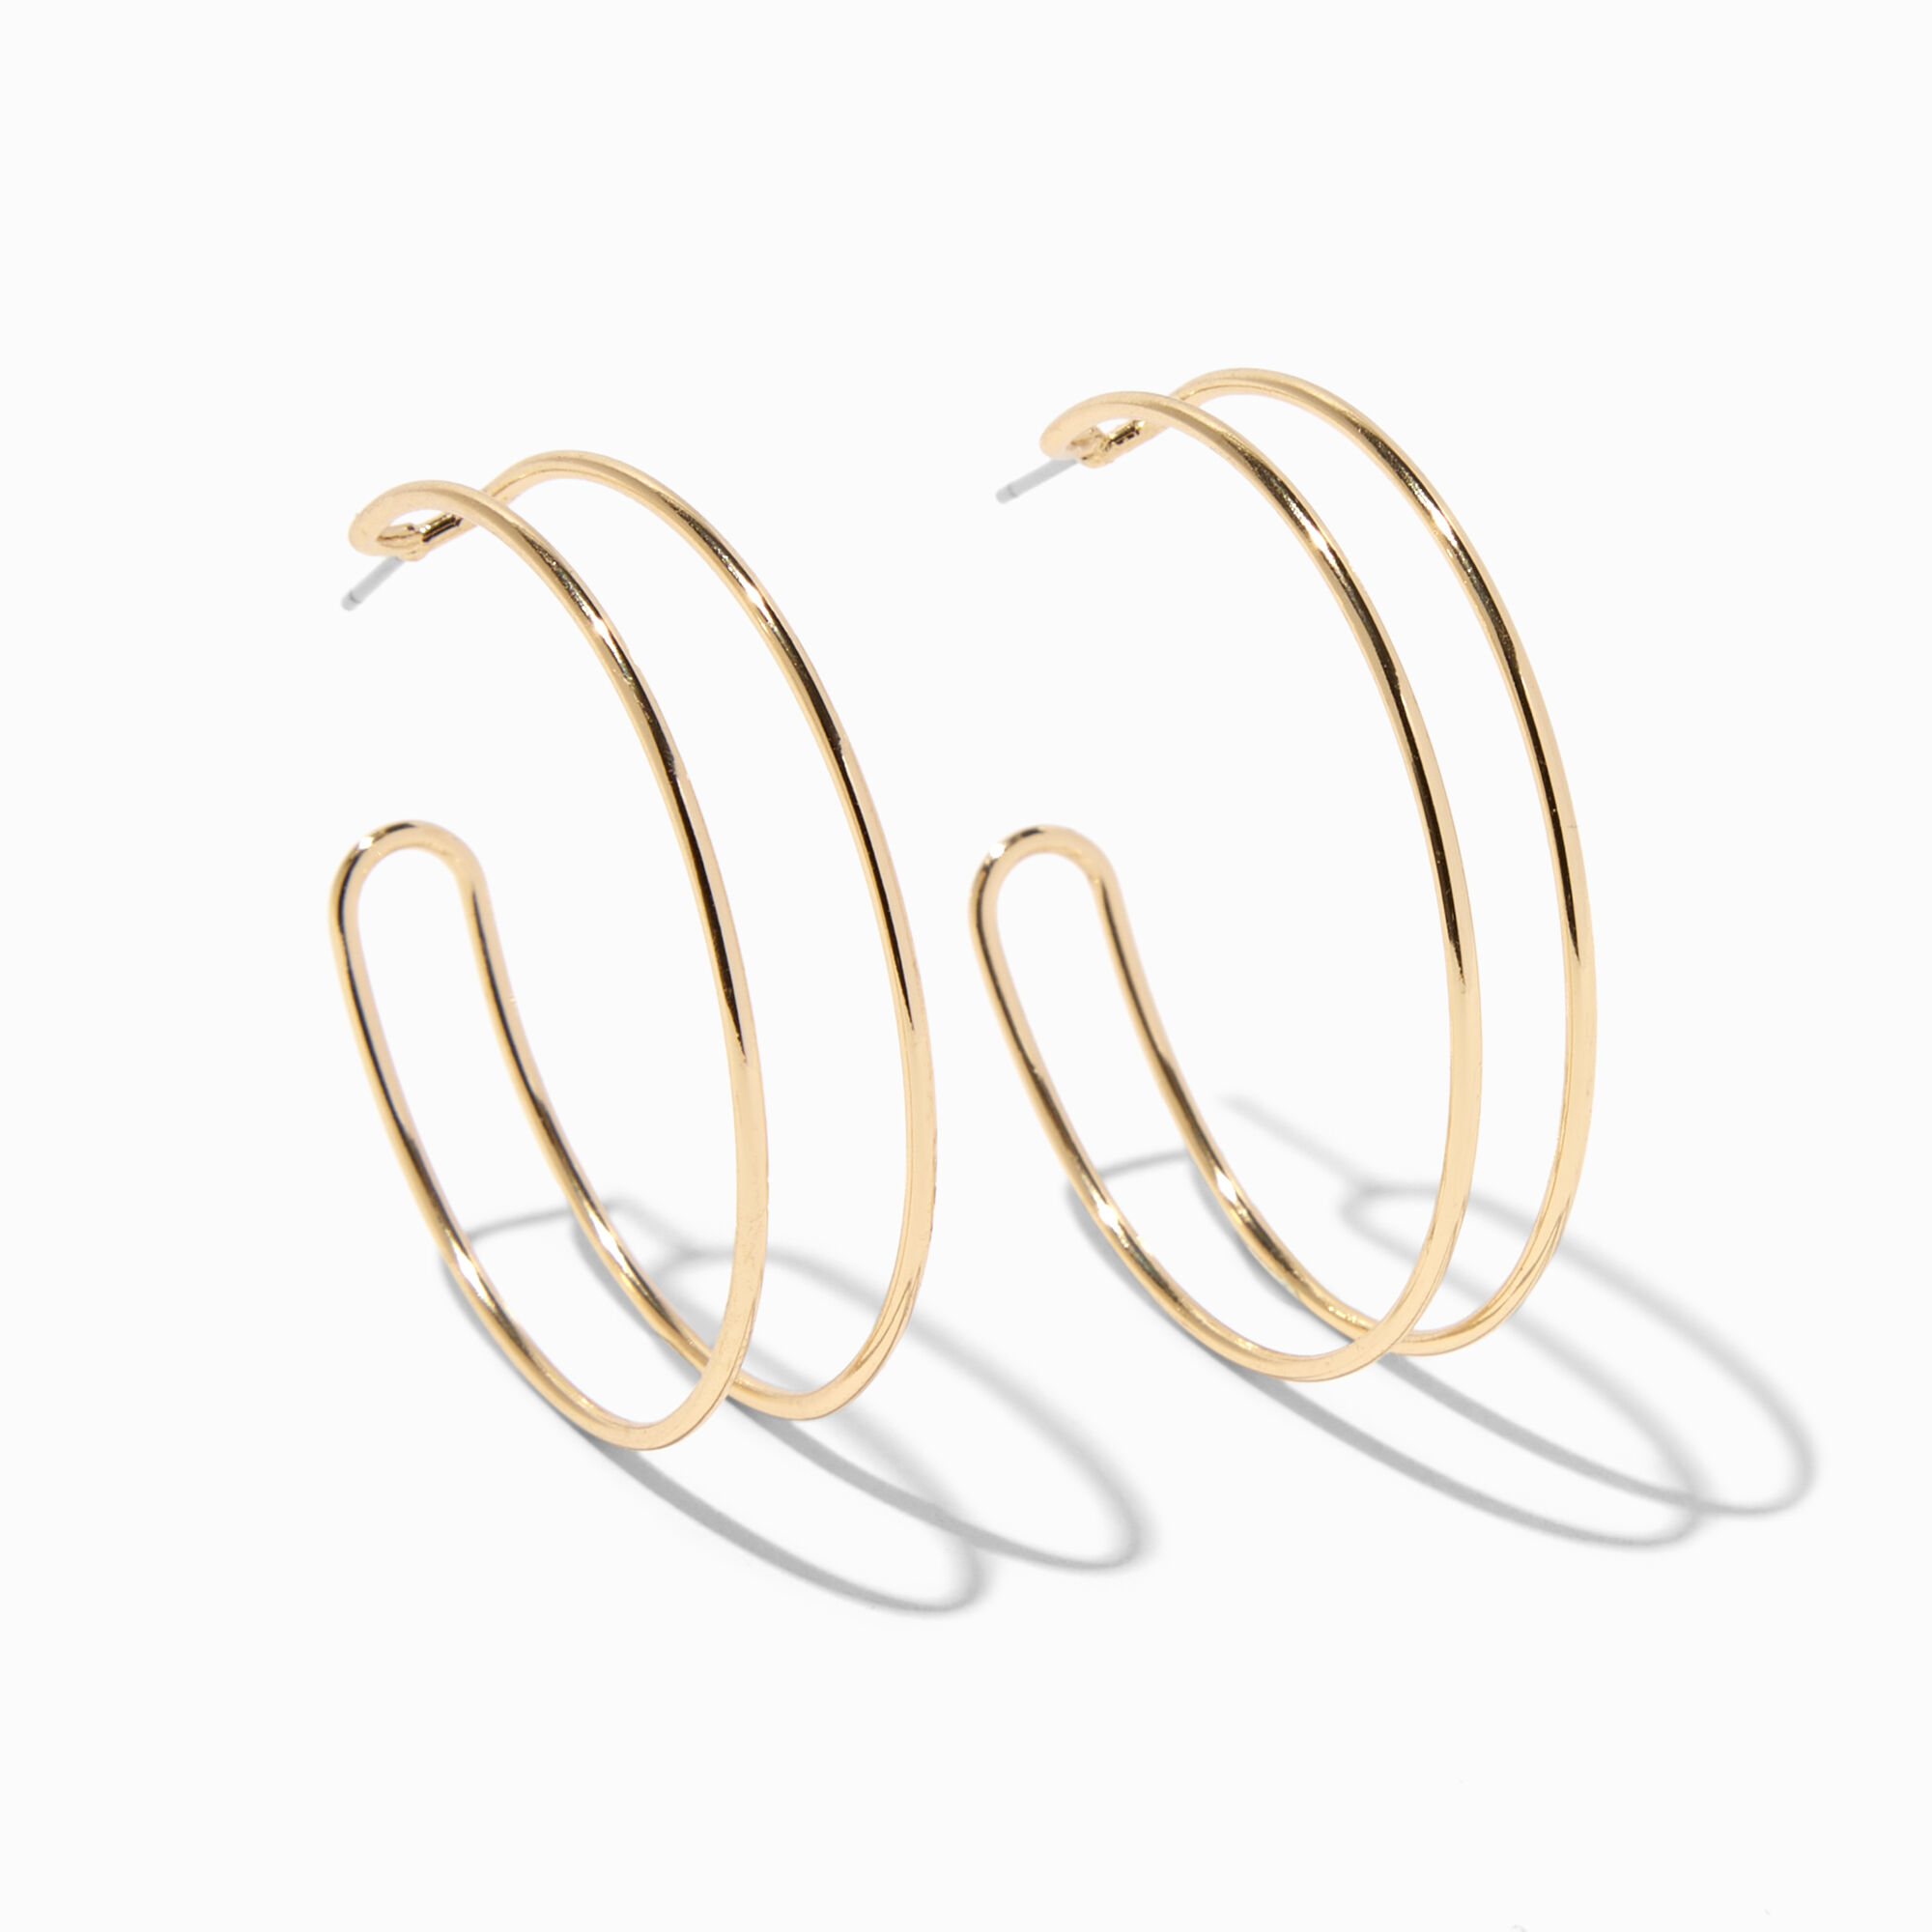 View Claires Tone 40MM Double Hoop Earrings Gold information